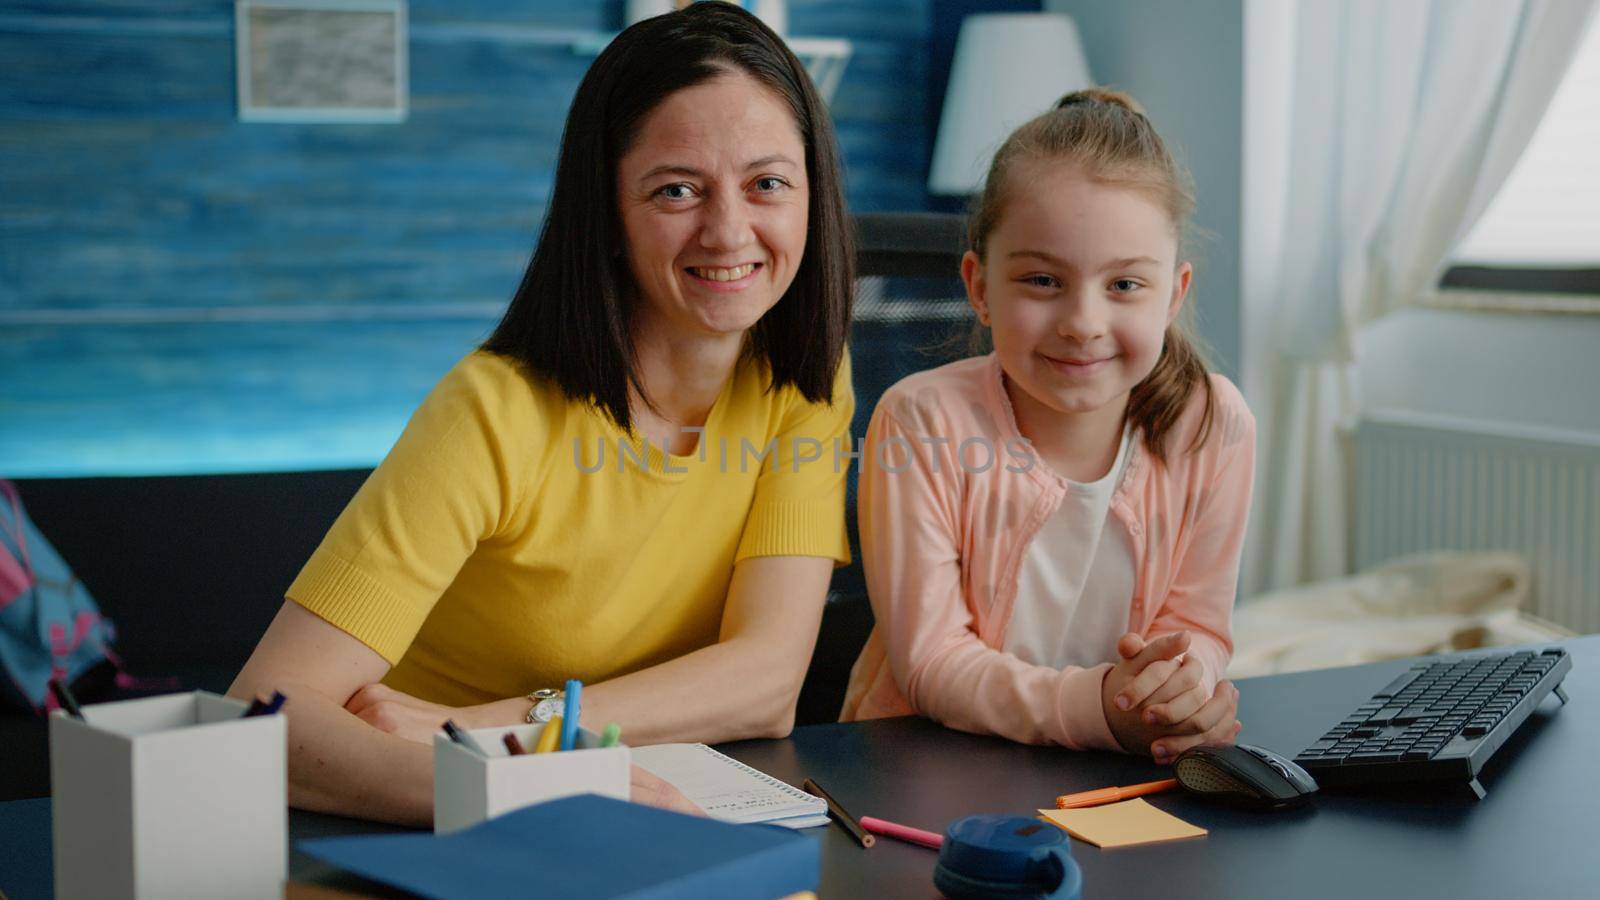 Affectionate mother sitting at desk with daughter for homework. Parent and little girl smiling and looking at camera, preparing for online remote class lesson at home. Adult and pupil